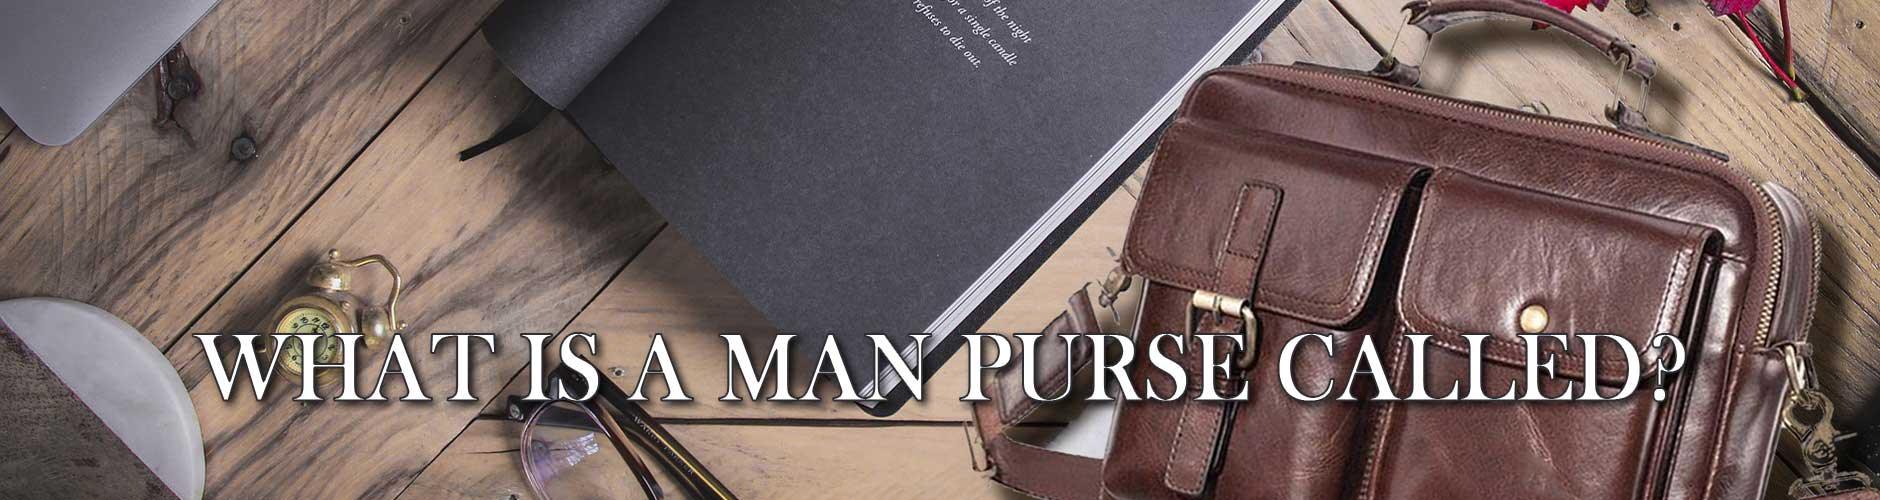 Business Casual Clutch Password Lock Male Wallet PU Leather Male Purse  Wallet Men's Clutch Bag Large Capacity Wallet Handbag on OnBuy